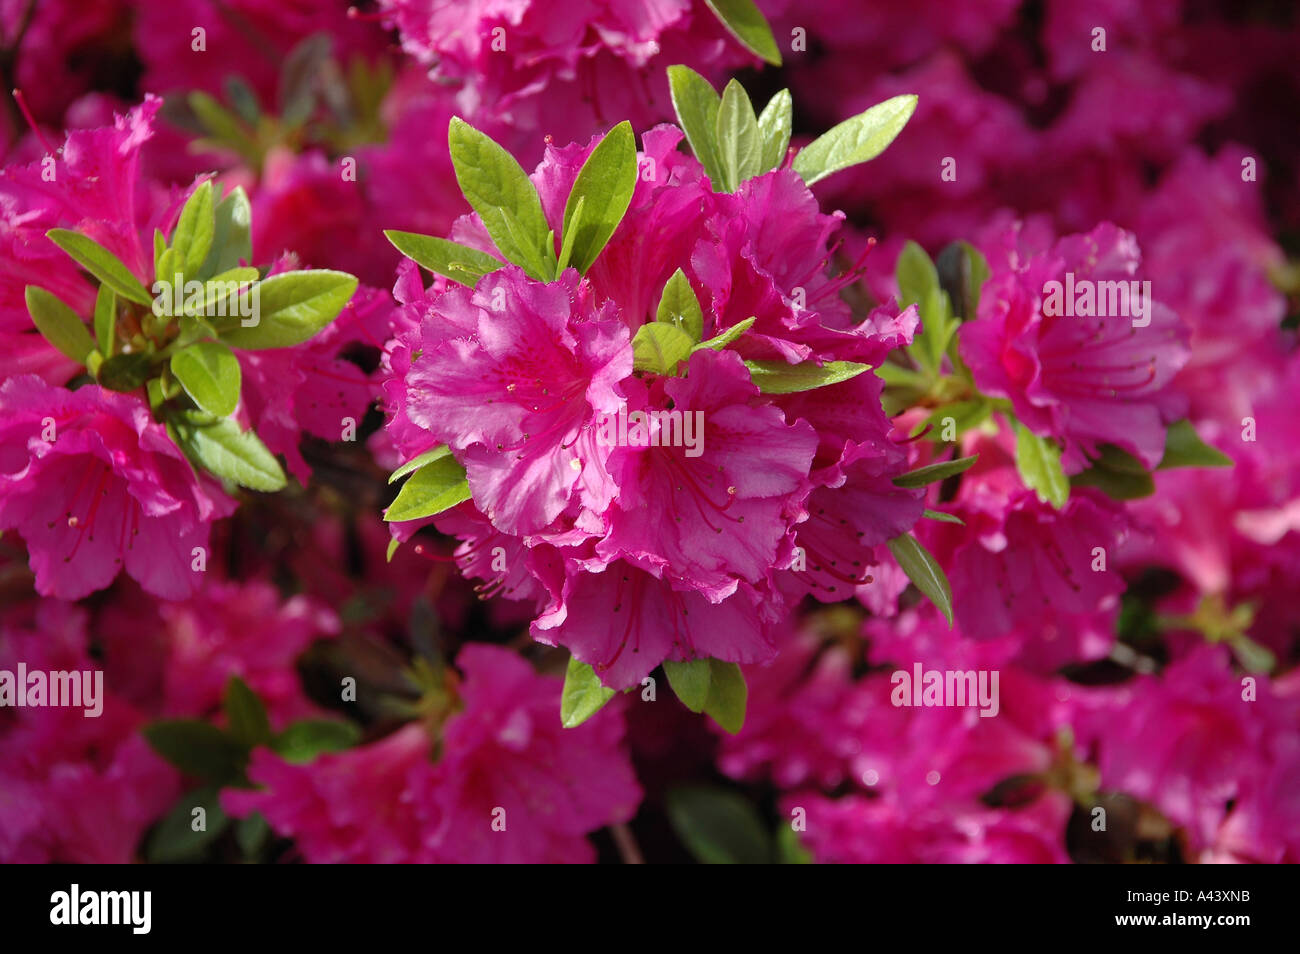 Clusters of Flowers Stock Photo